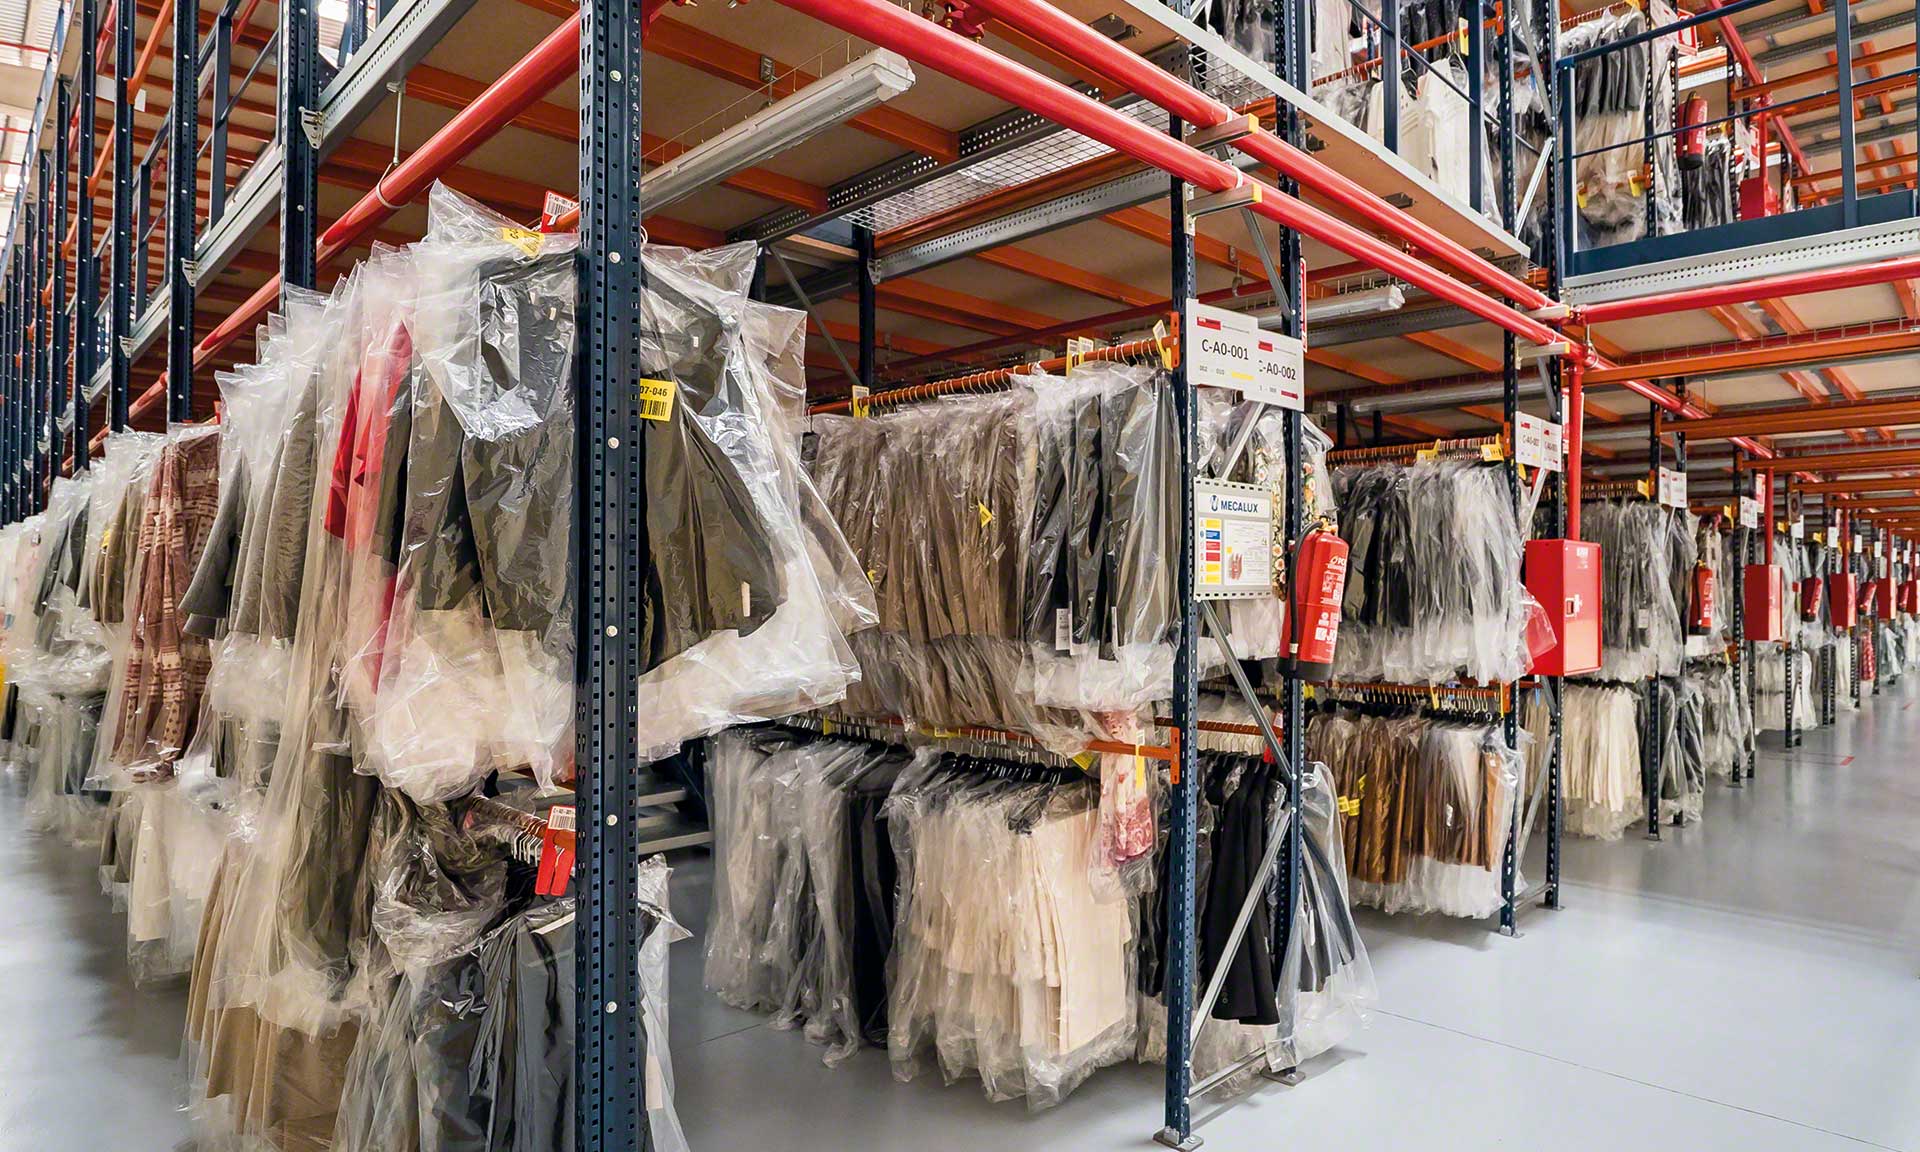 Warehouse clothing racks: how to store garments